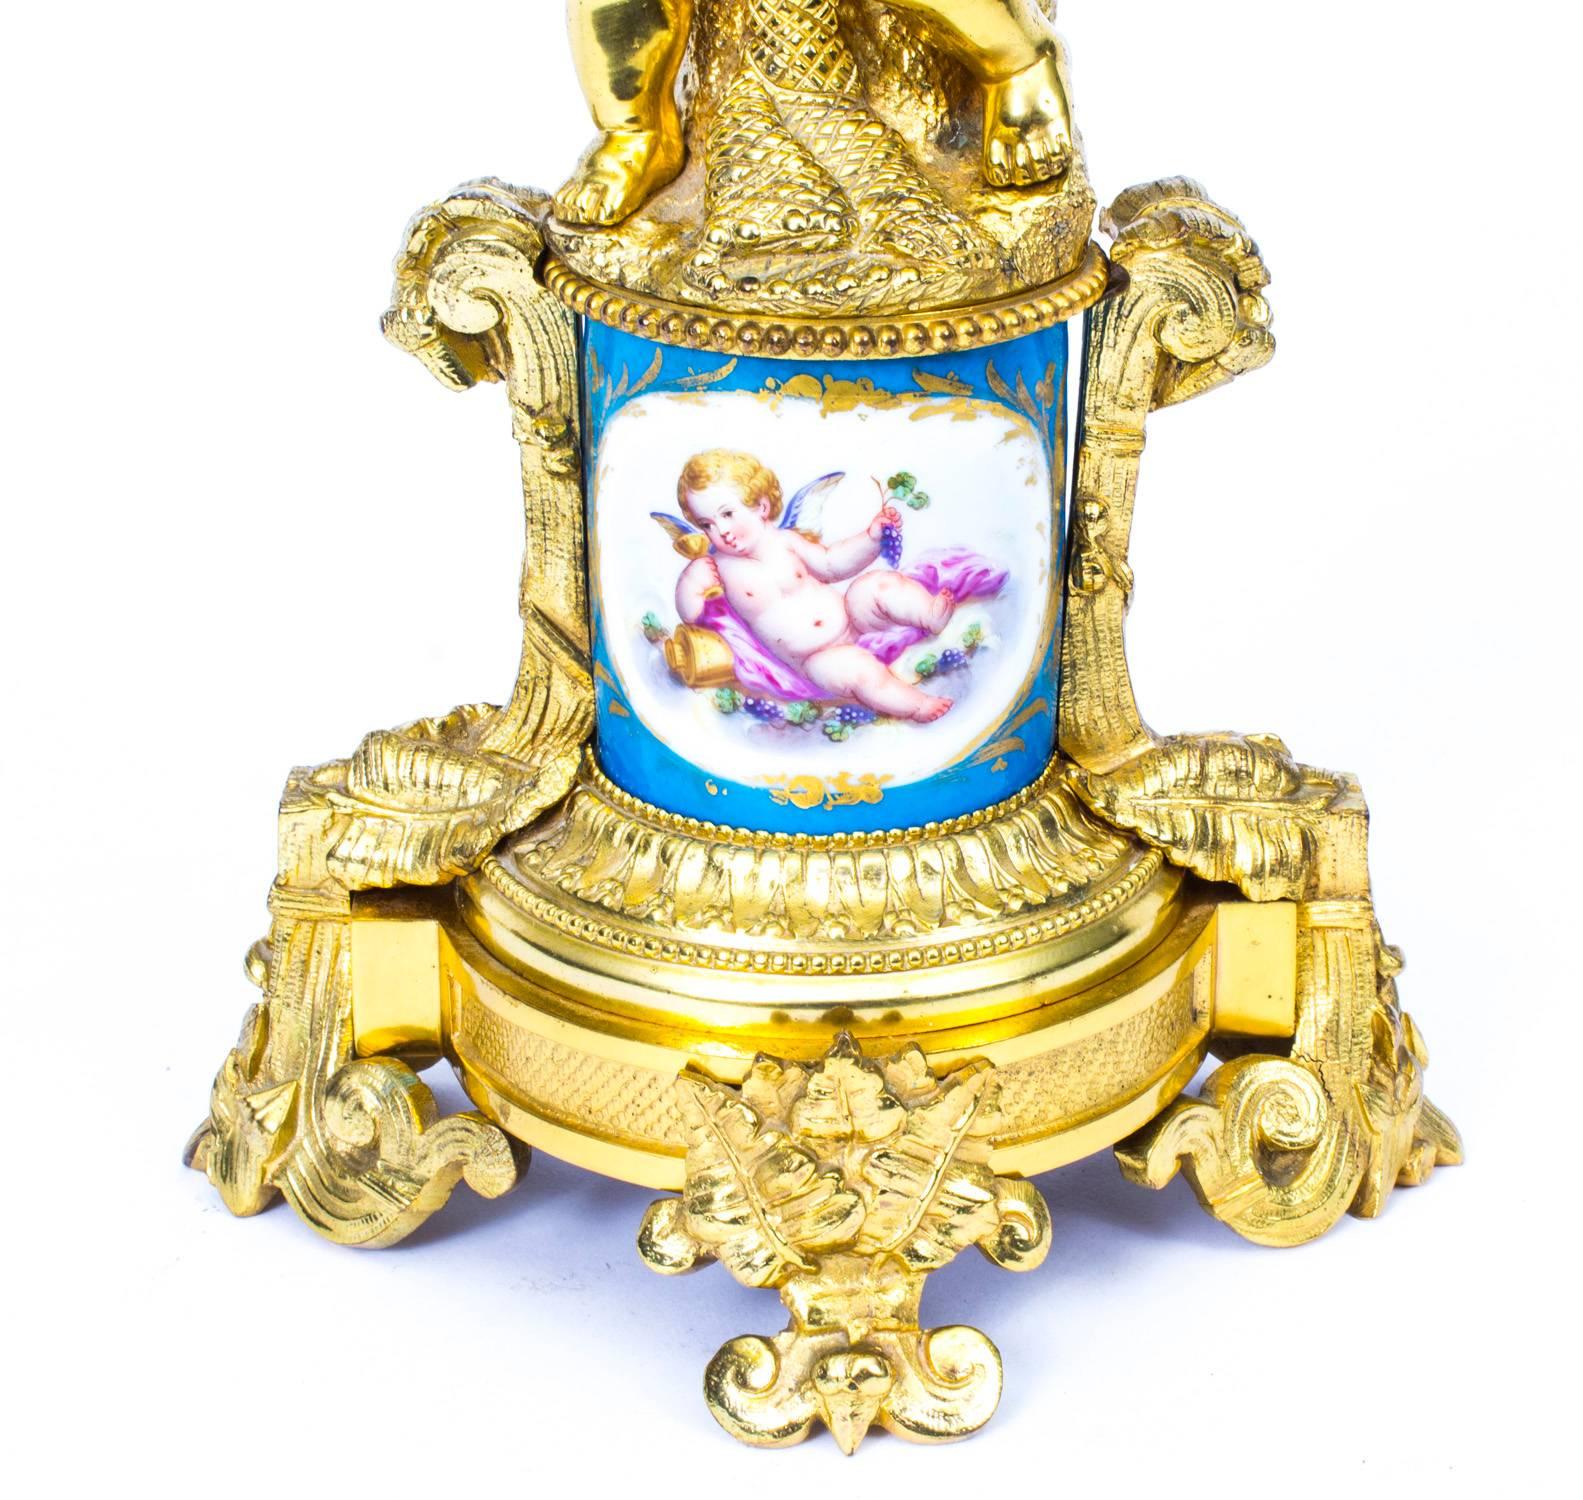 A fine quality French Sèvres Porcelain and ormolu electric table lamp, with central soft paste porcelain hand-painted socle support depicting a cherub on a celeste blue ground, ending on an ornate ormolu circular base, with spreading scroll feet,